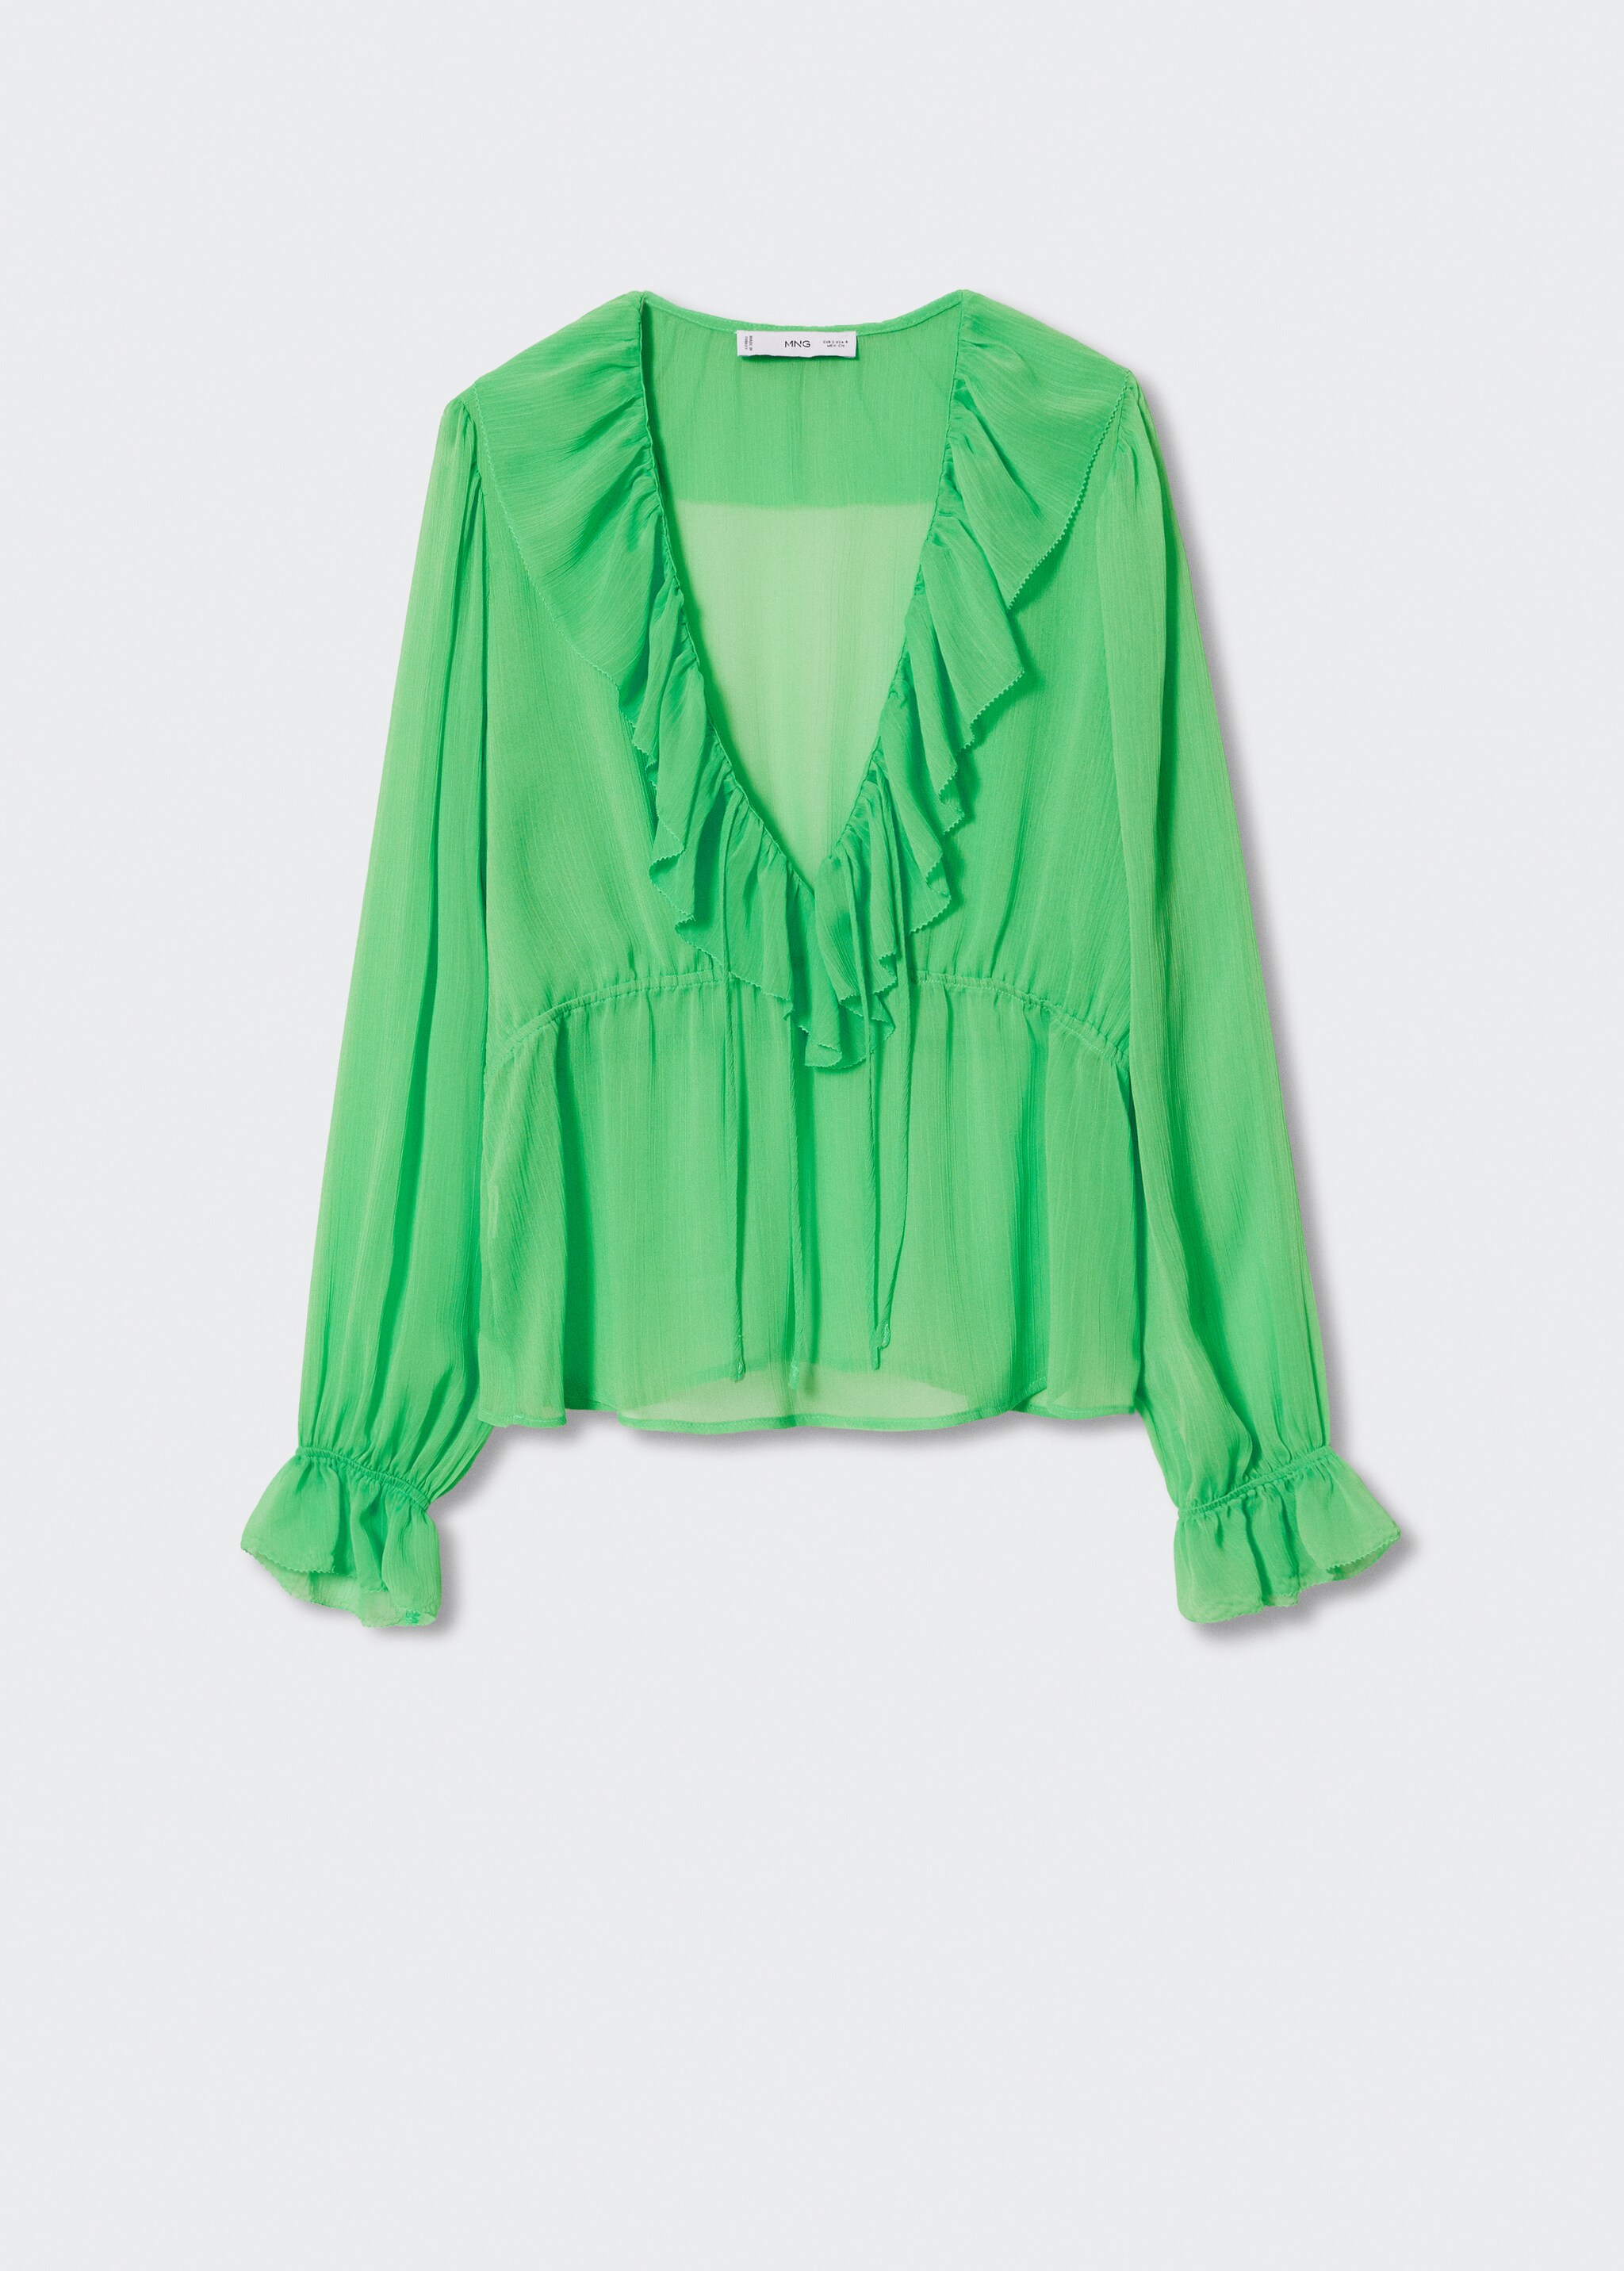 Ruffled neck blouse - Article without model